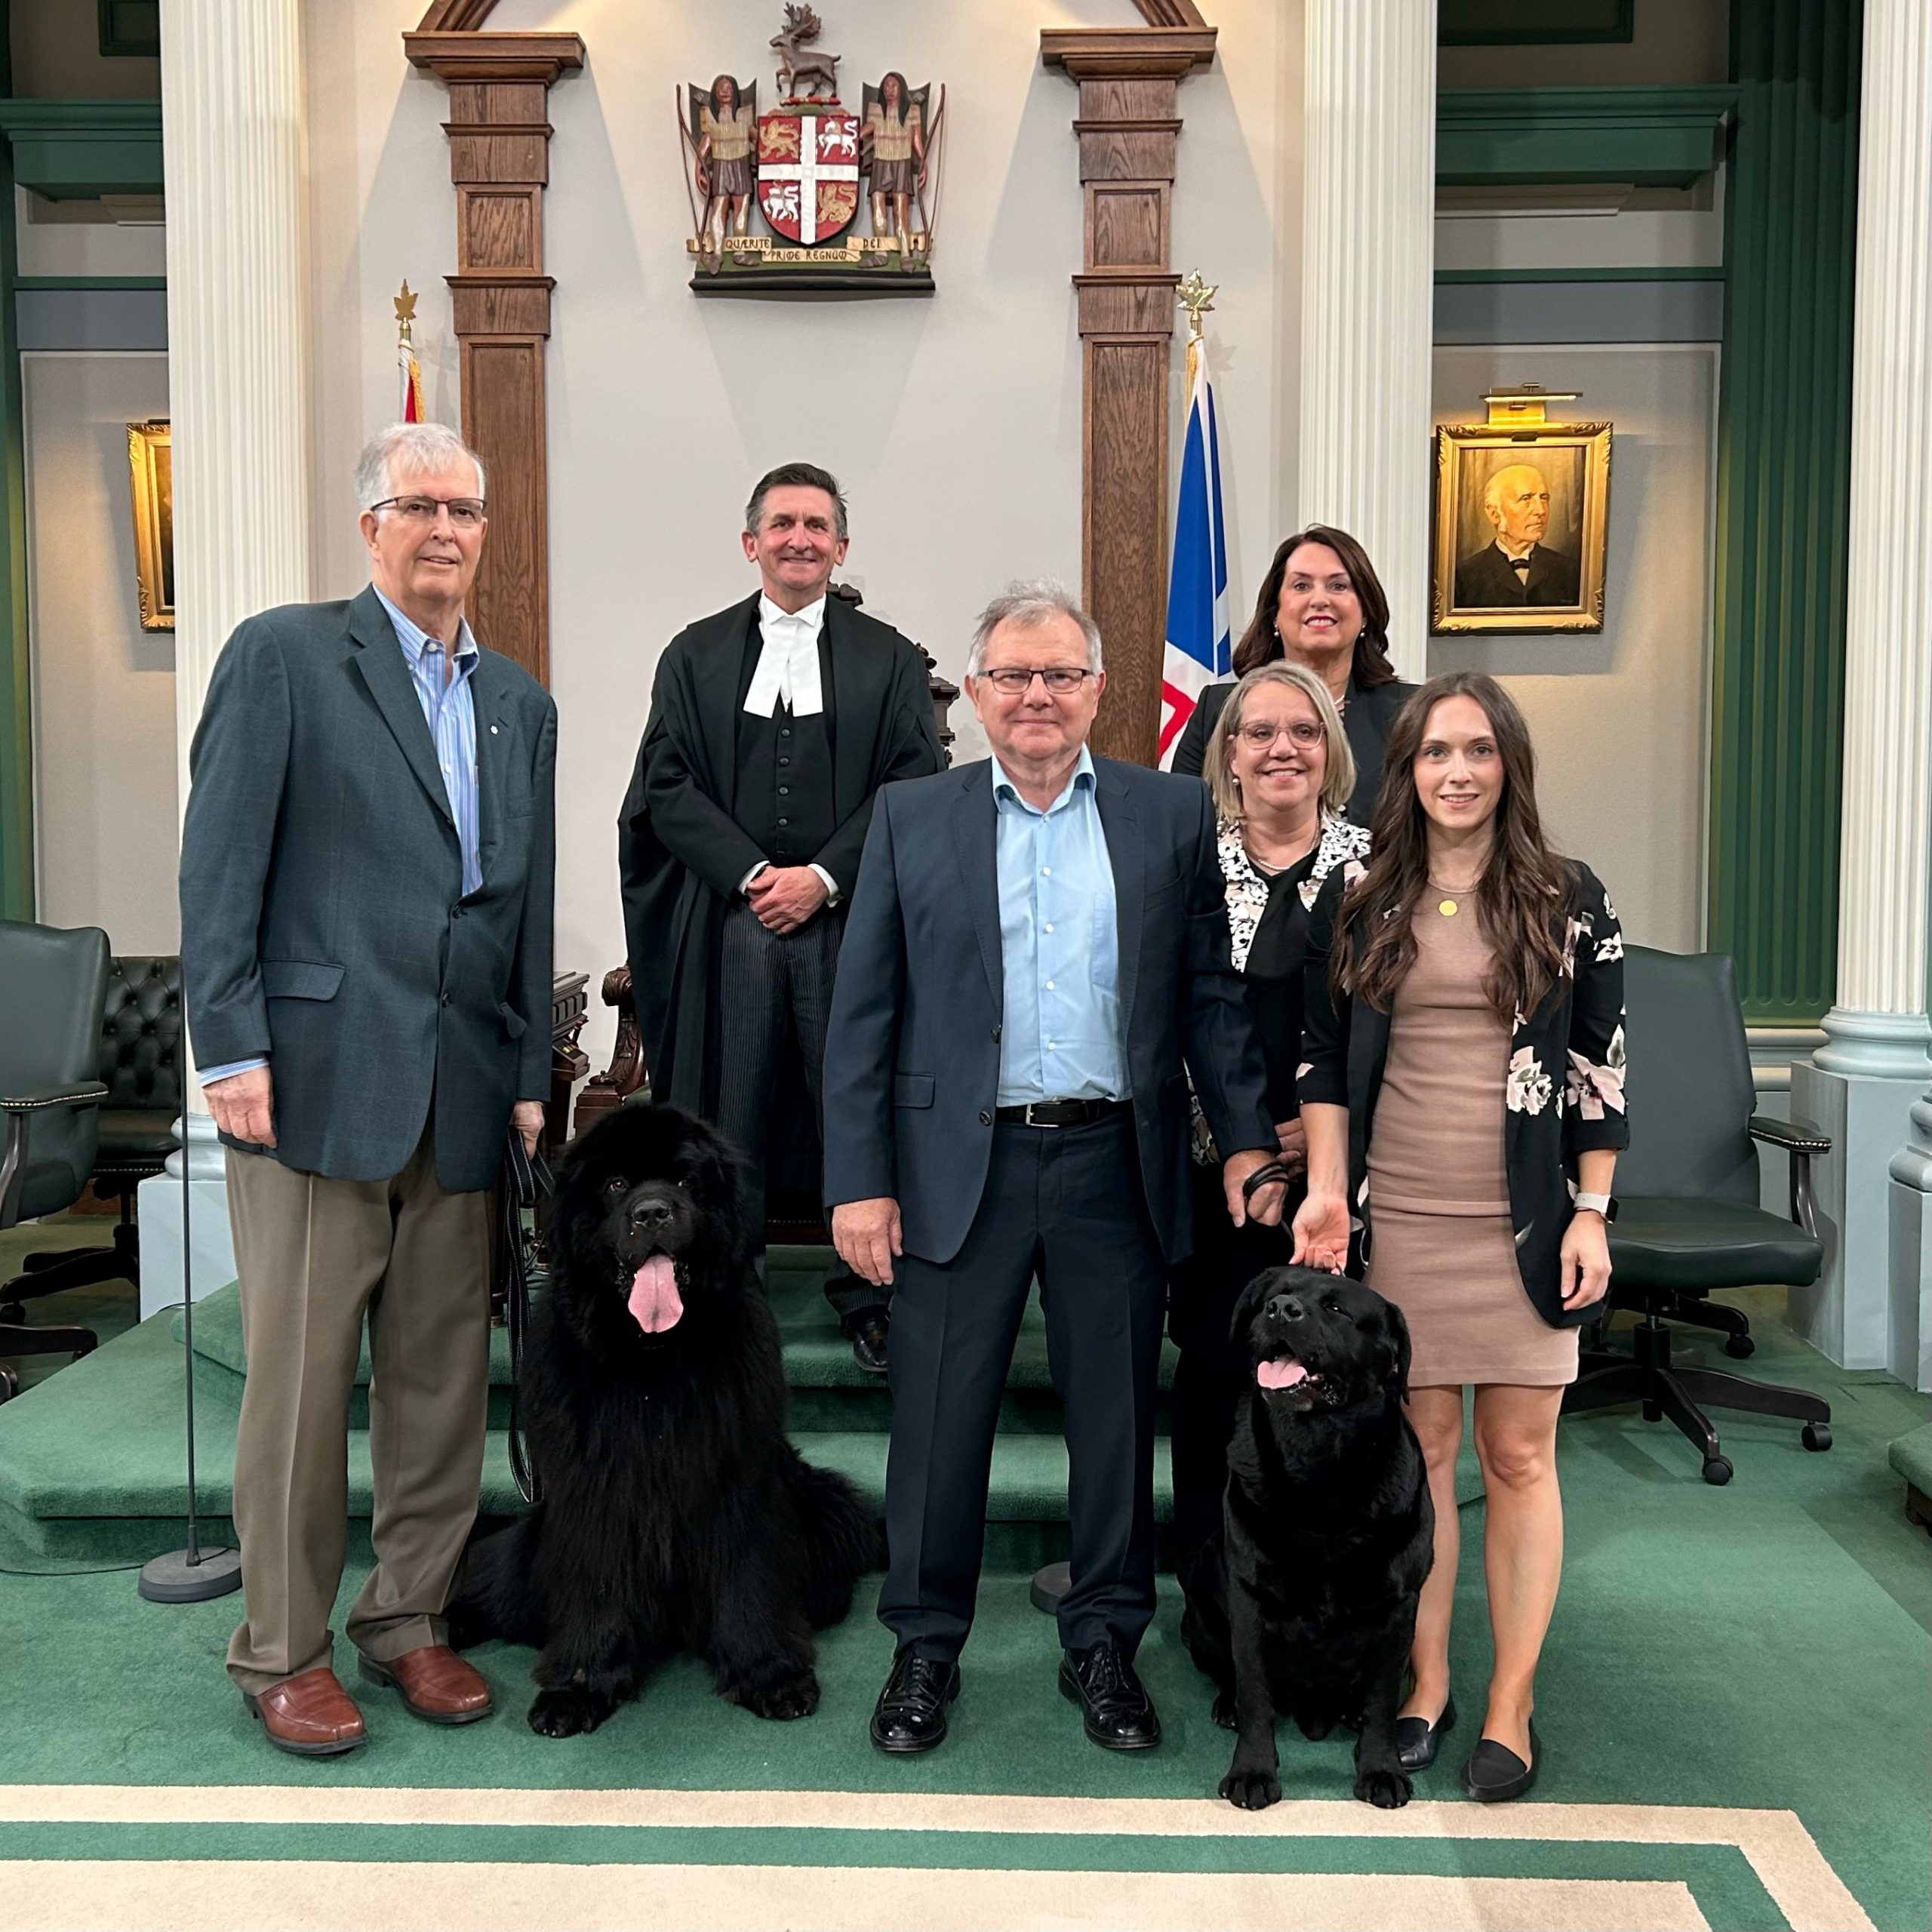 Night, the Newfoundland dog, and Beau, the Labrador Retriever, visited the House of Assembly. From left to right: Rob Crosbie, Speaker Derek Bennett, Pat Coady, Pamela Squires, the Honourable Siobhan Coady, and Caitlin O’Brien-Dyke.